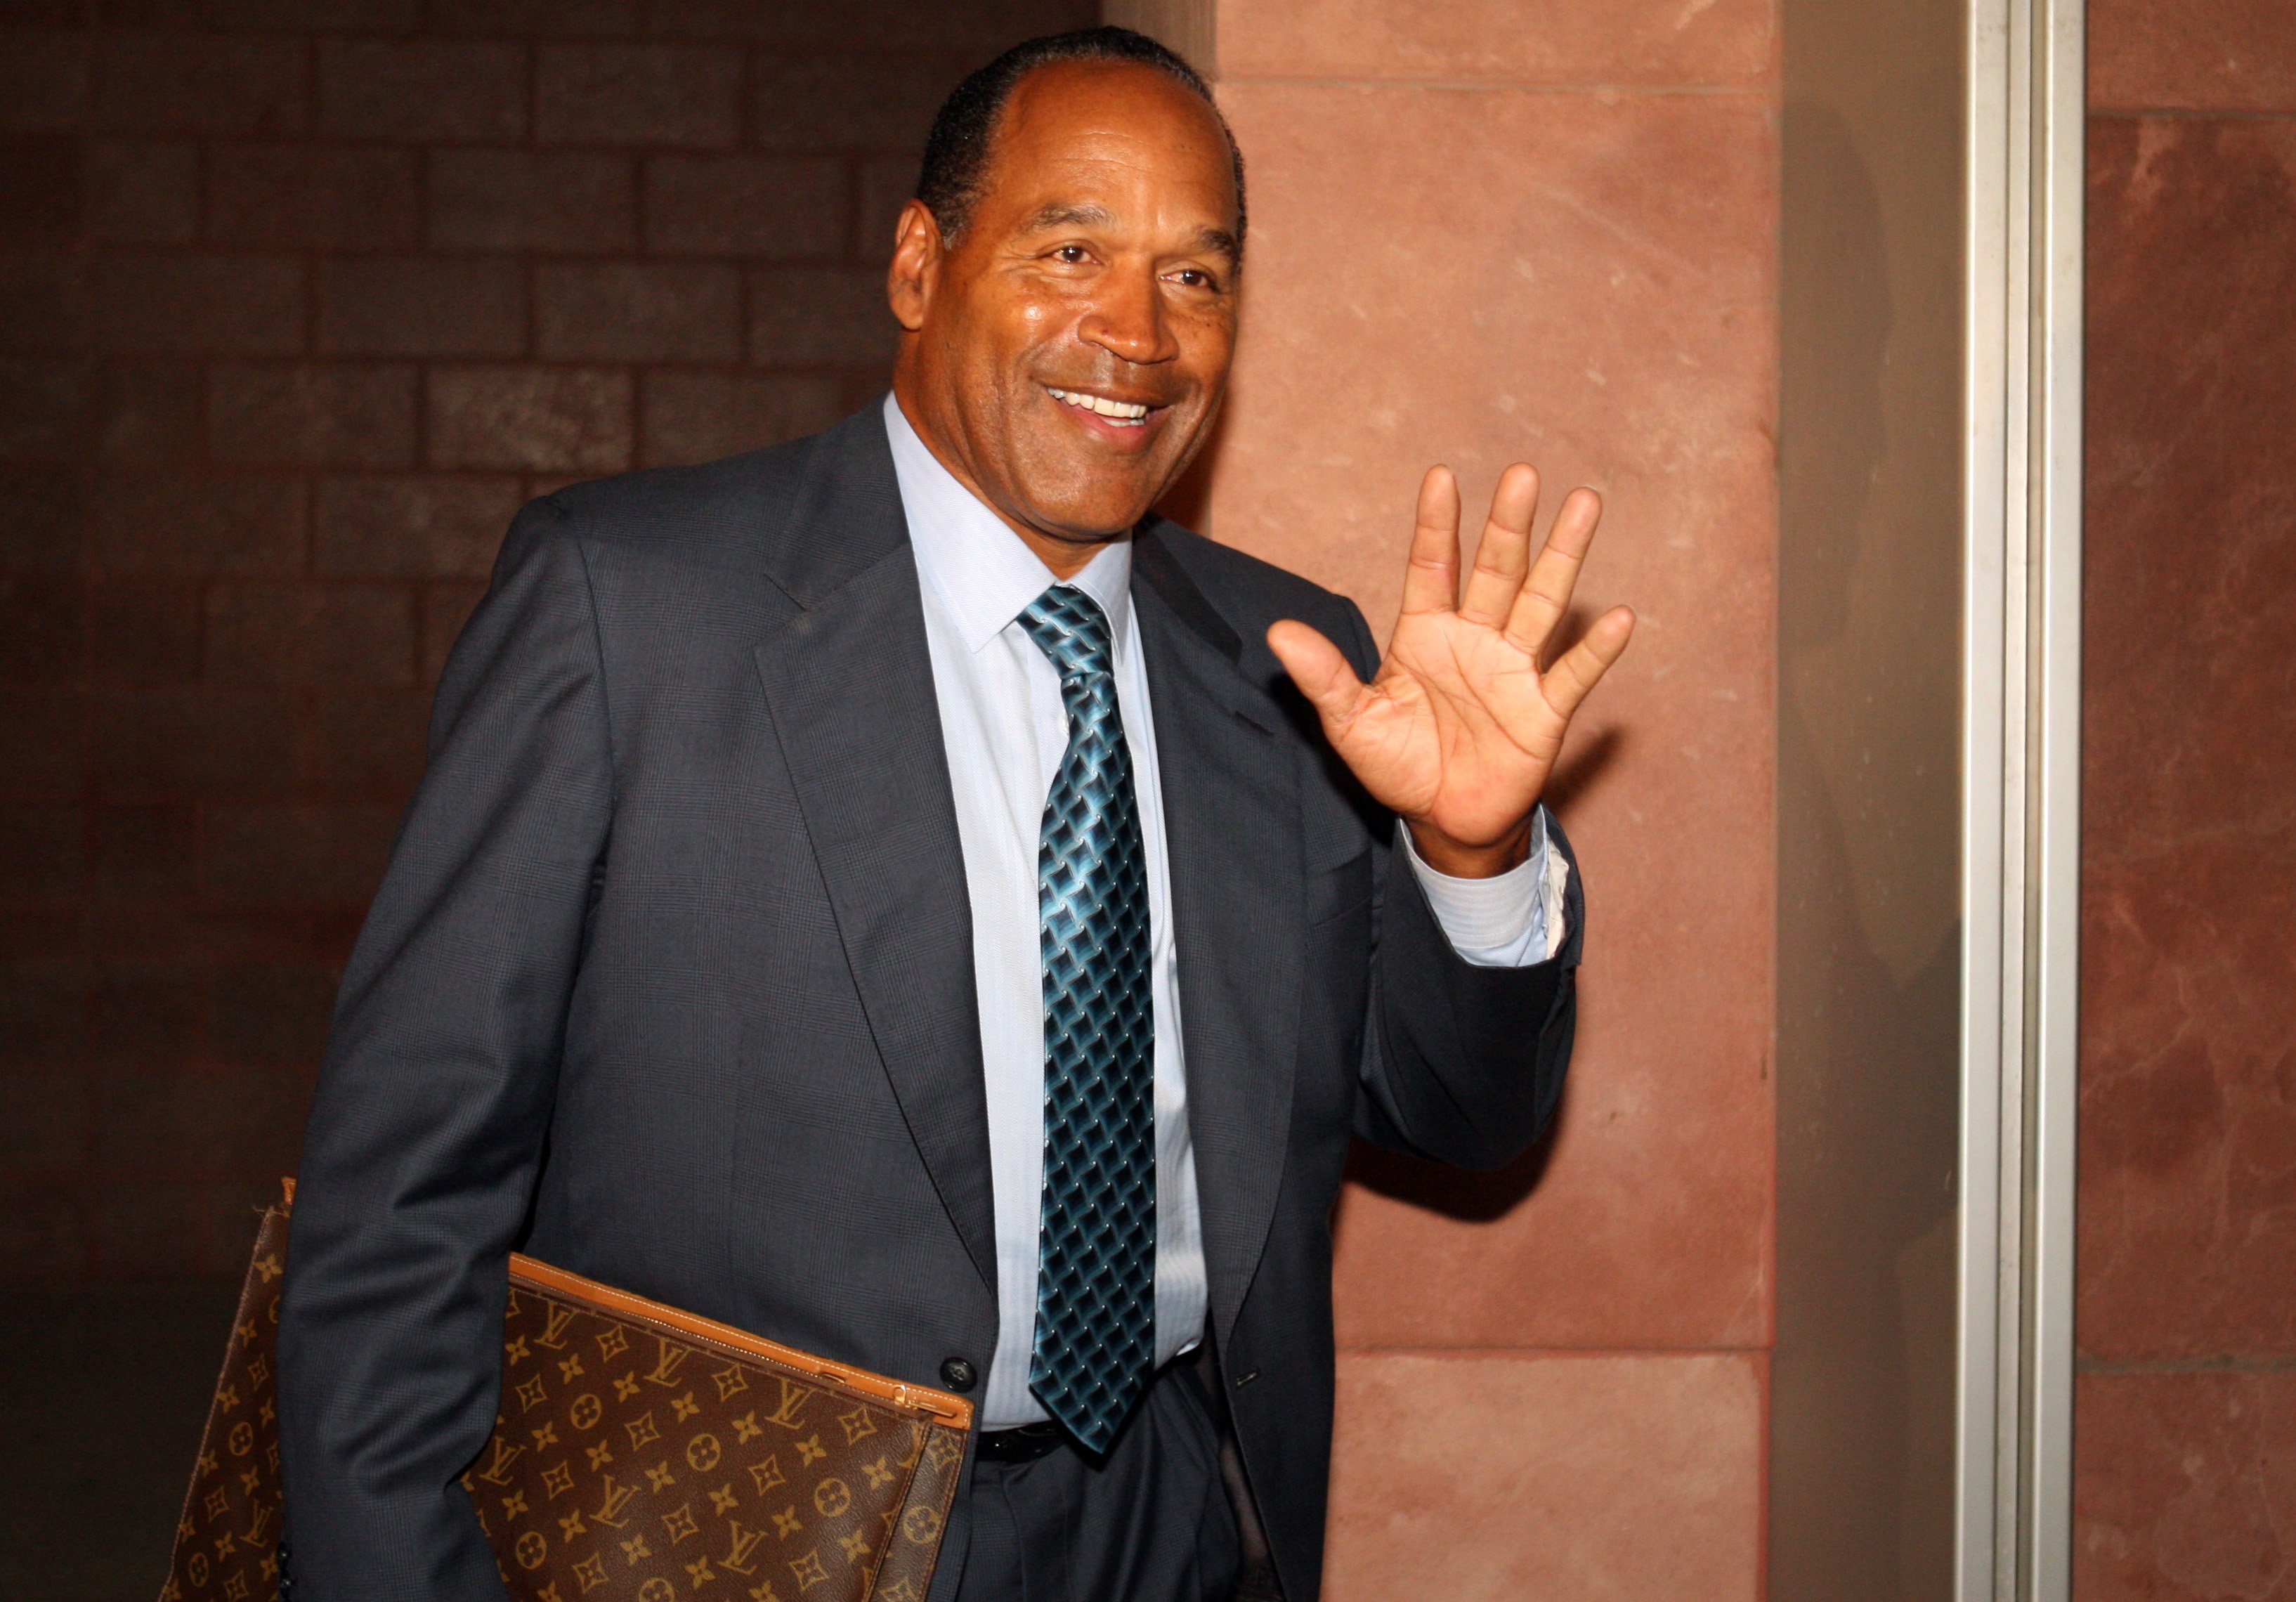 O.J. Simpson leaves court after closing arguments for his trial at the Clark County Regional Justice Center on October 2, 2008. | Photo: GettyImages